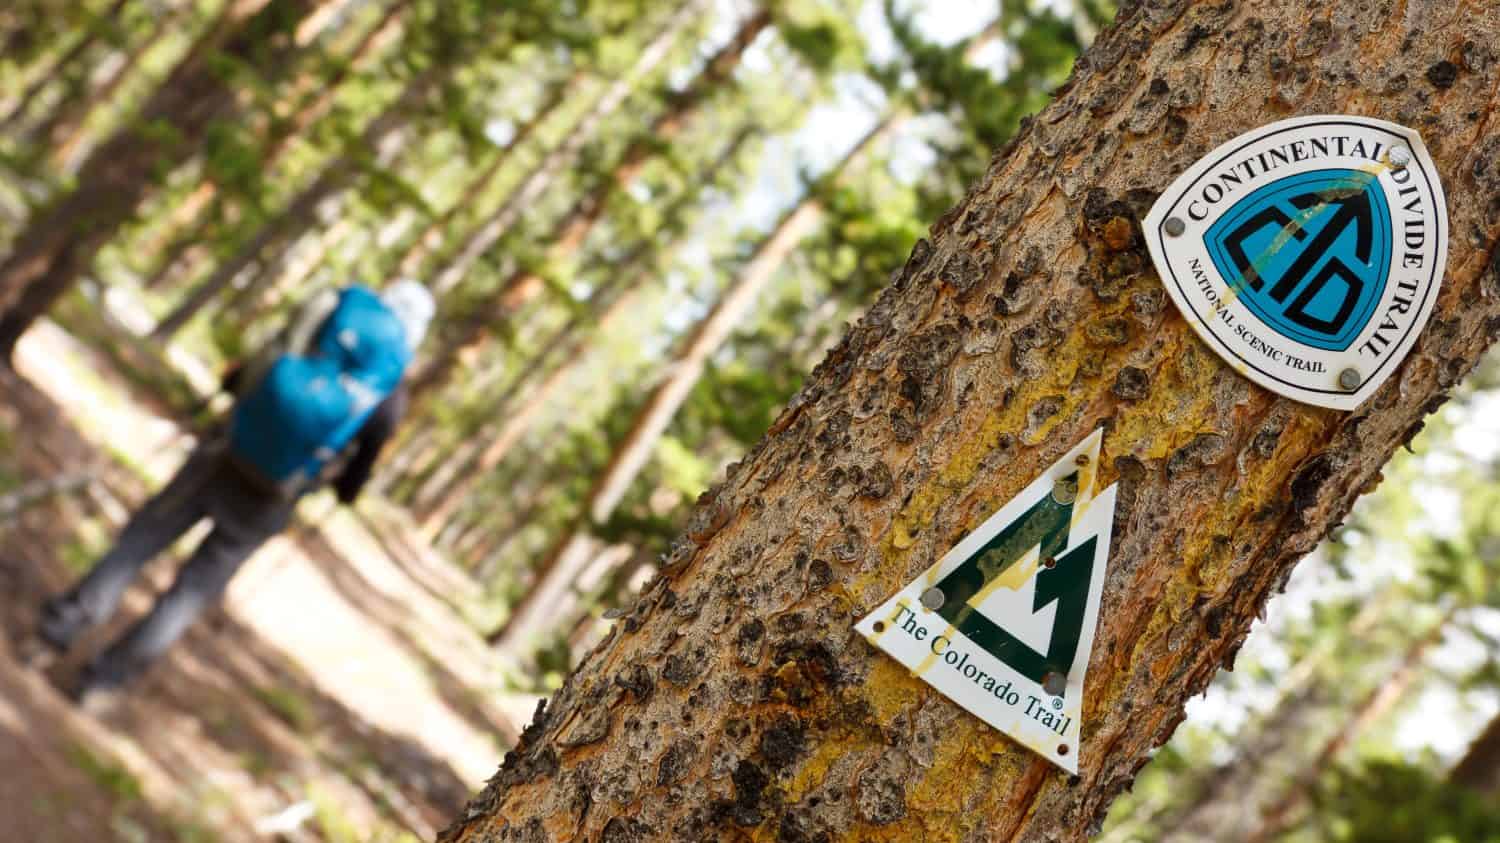 Continental Divide Trail and Colorado Trail Signs on a Tree